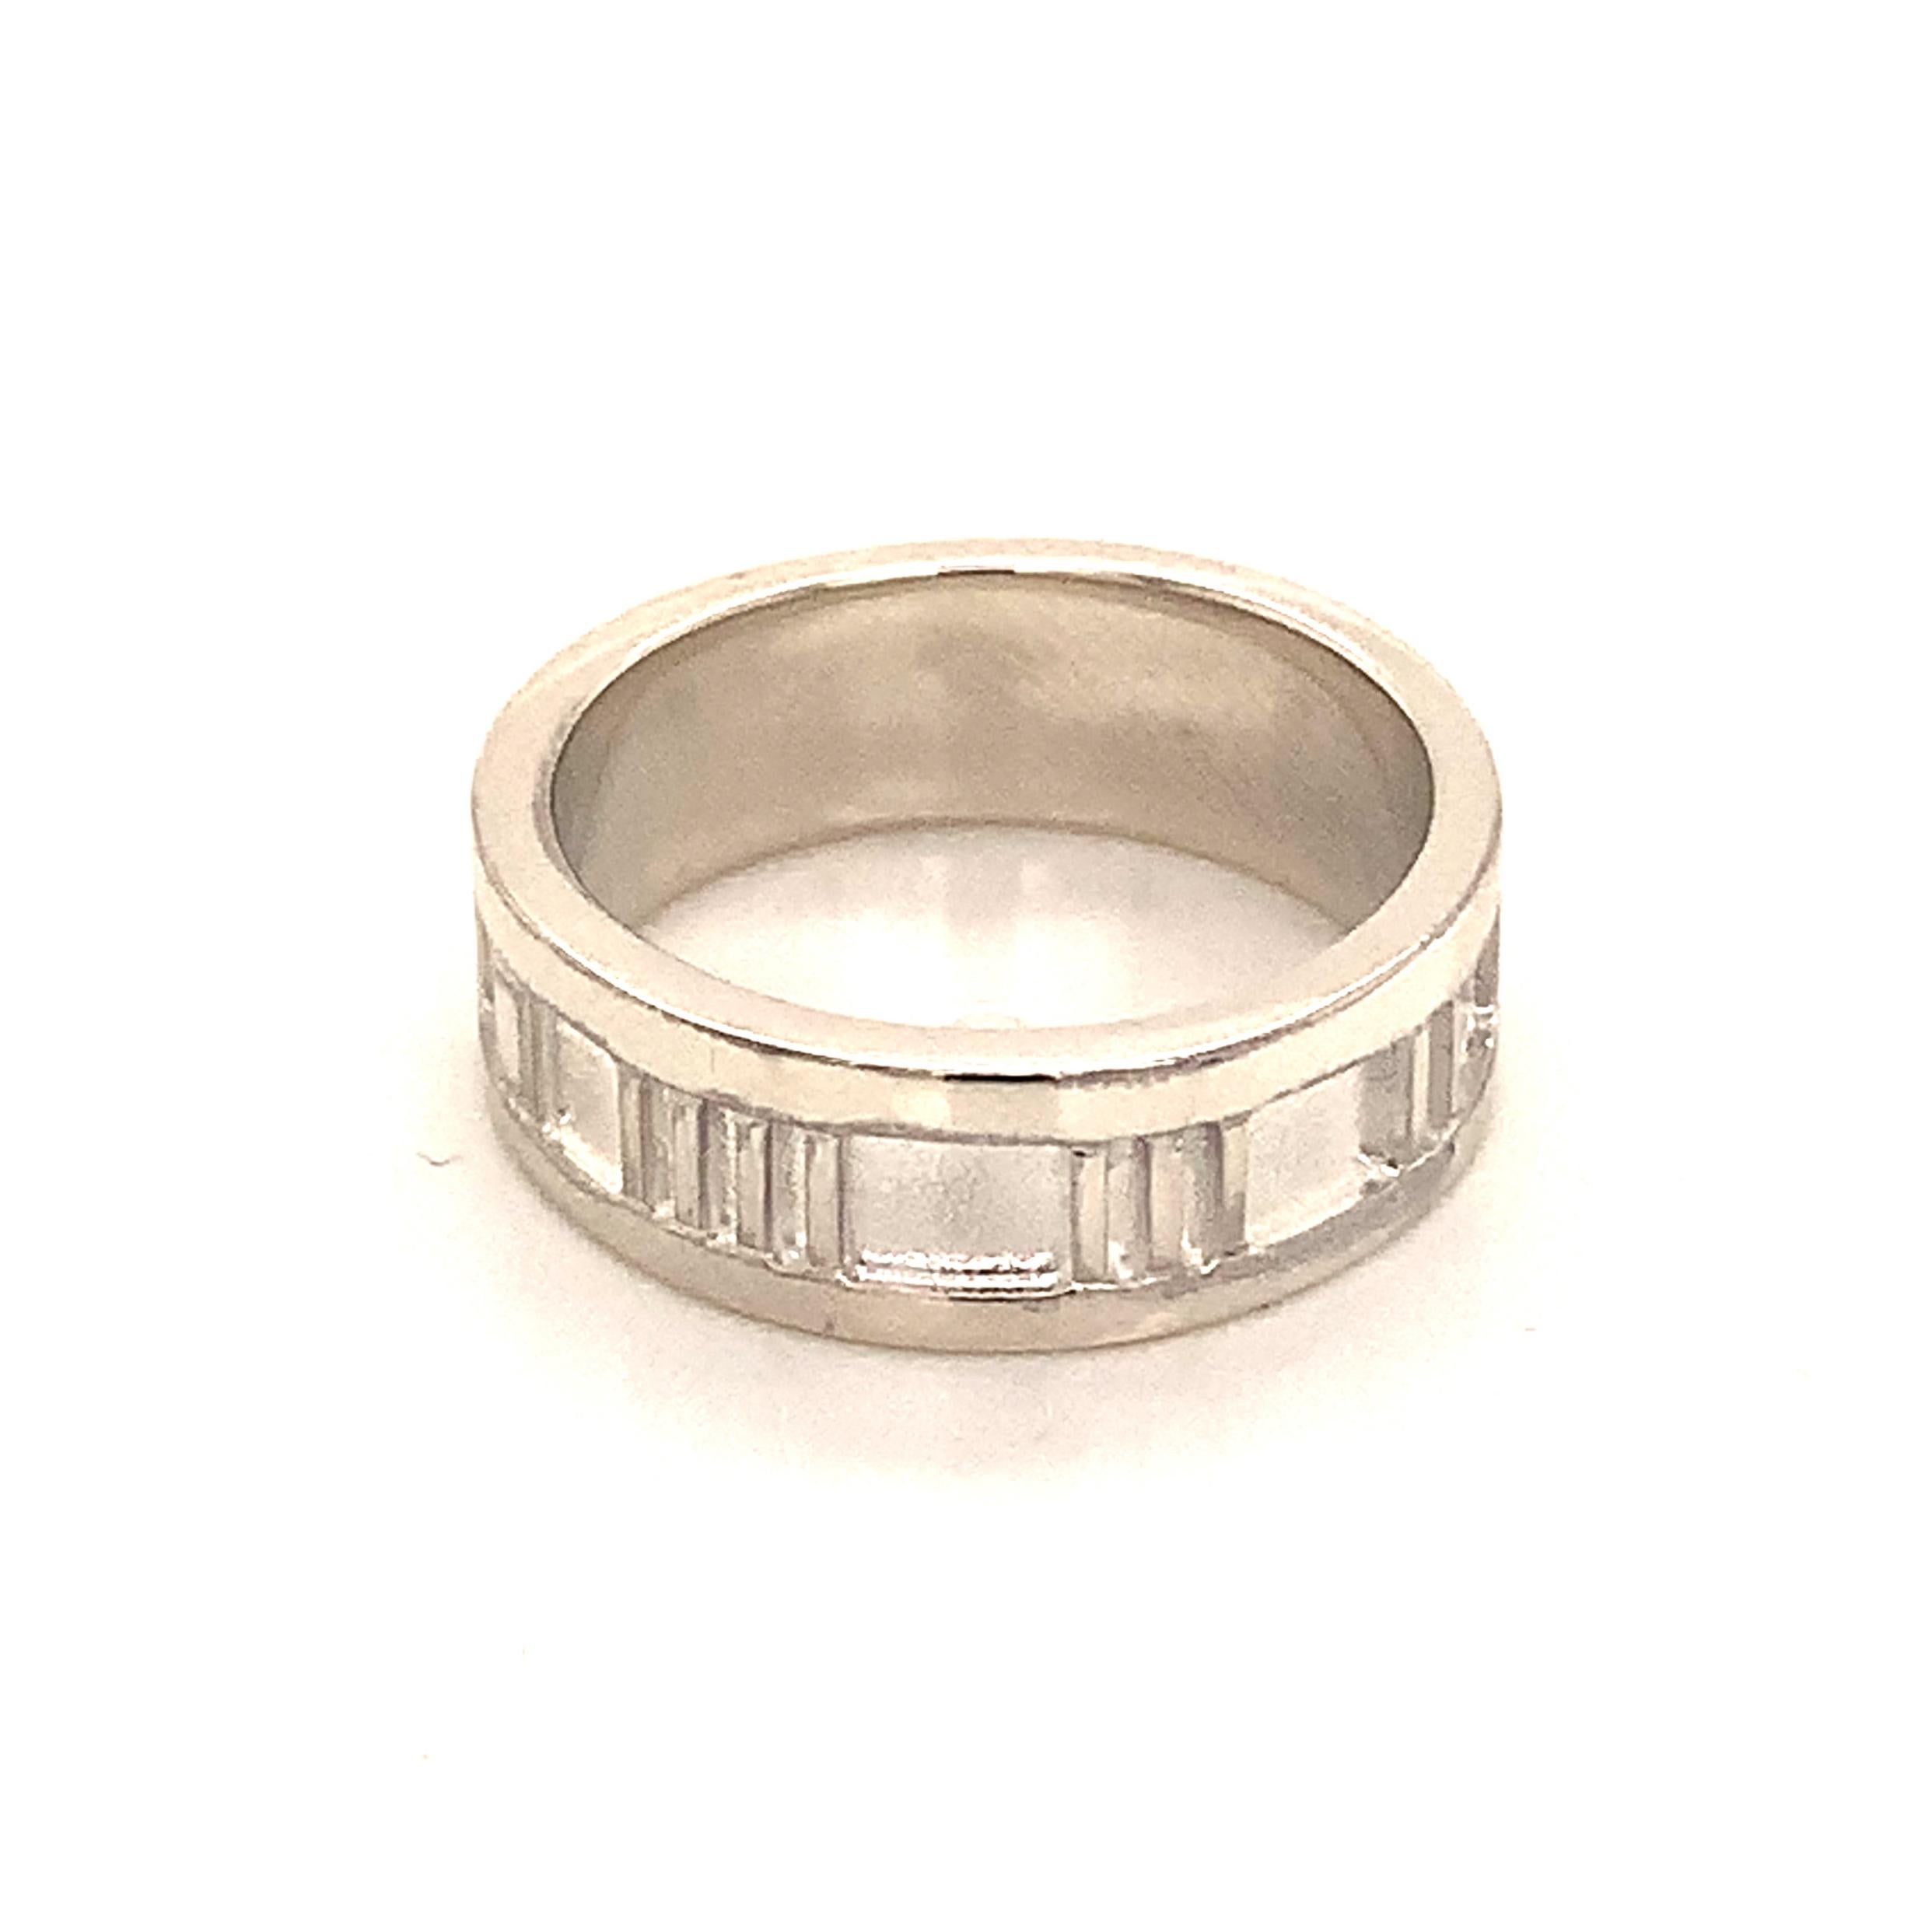 Tiffany & Co. Estate Ring Sterling Silver 4.2 Grams For Sale 2